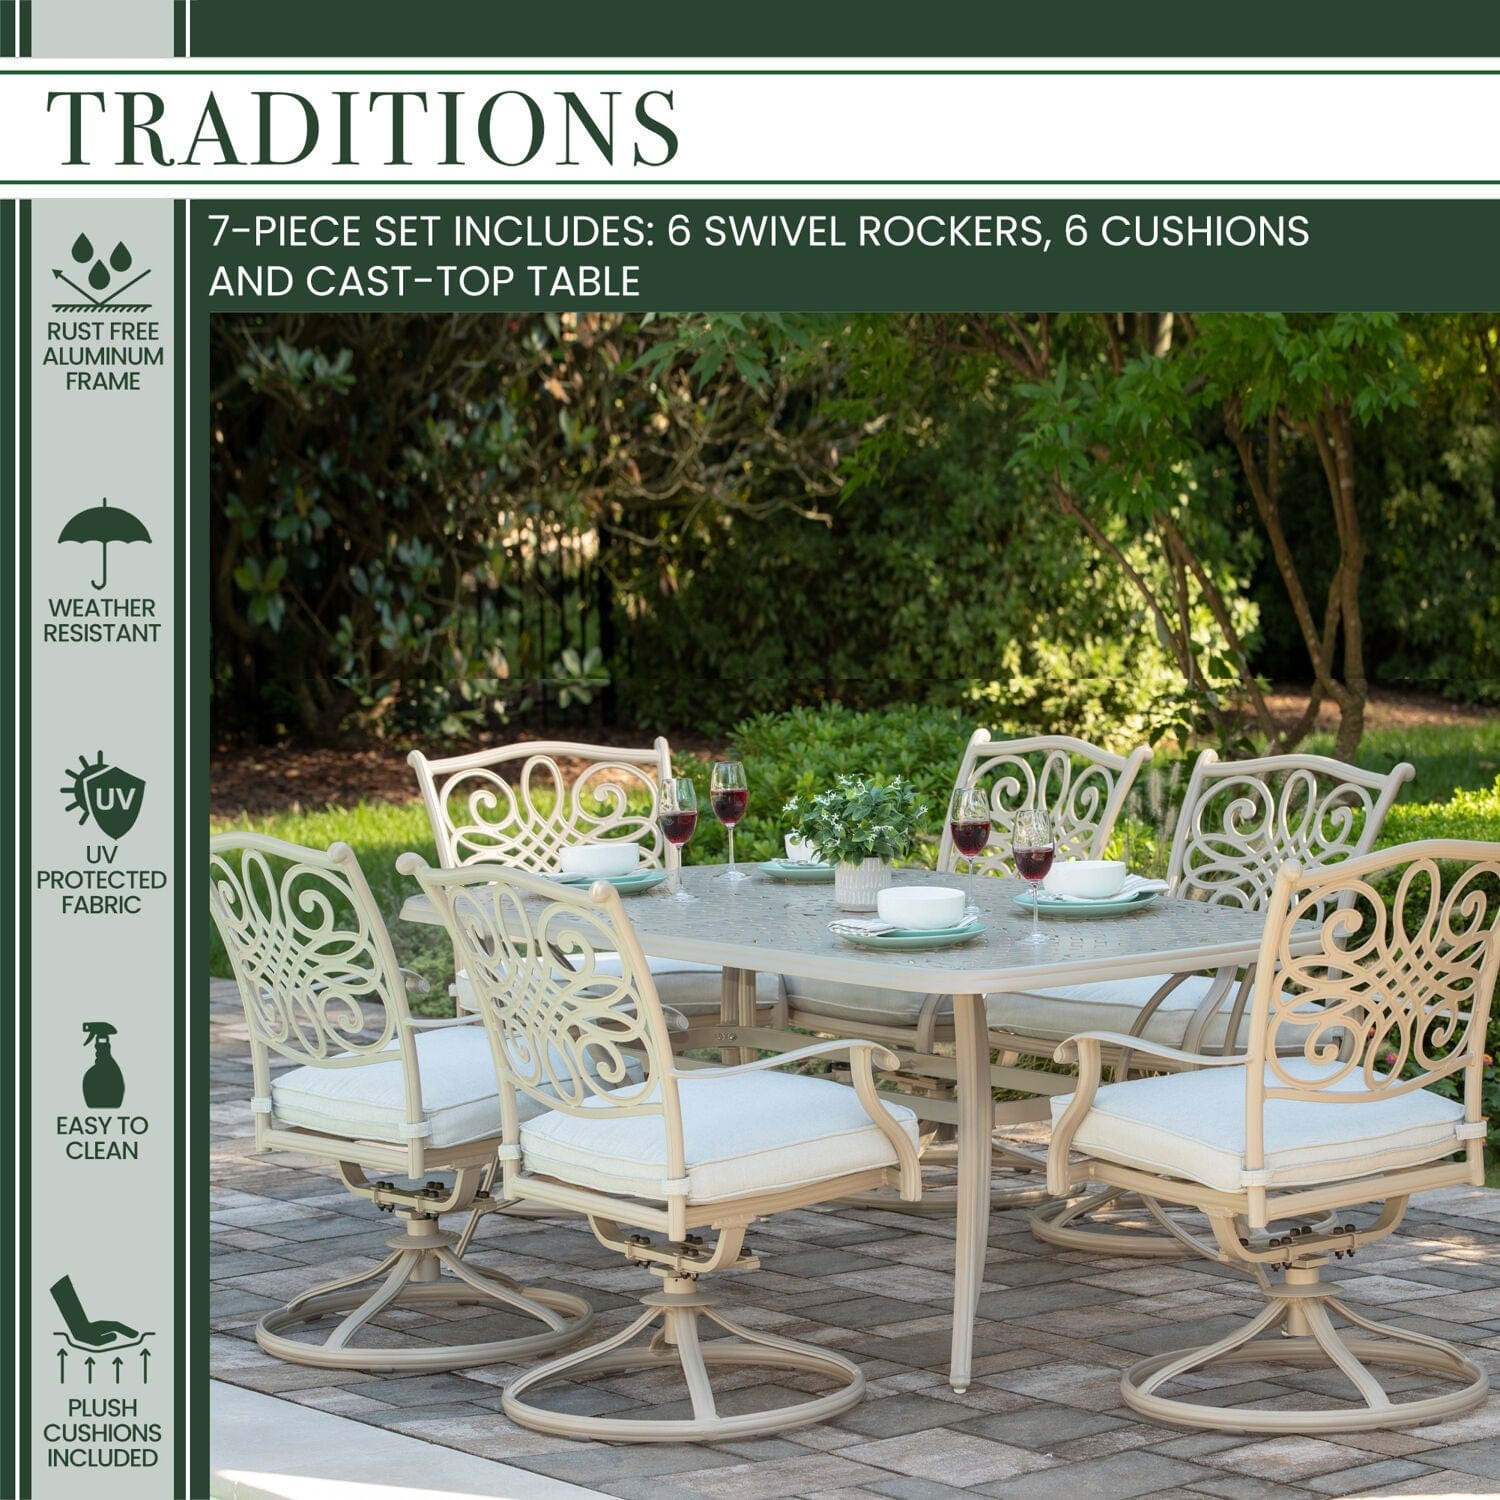 Hanover Outdoor Dining Set Hanover - Traditions 7-Piece Aluminum Frame Dining Set with 6 Swivel Rockers and 38-in. x 72-in. Cast-top Table in Sand Finish | TRADDNSD7PCSW6-BE